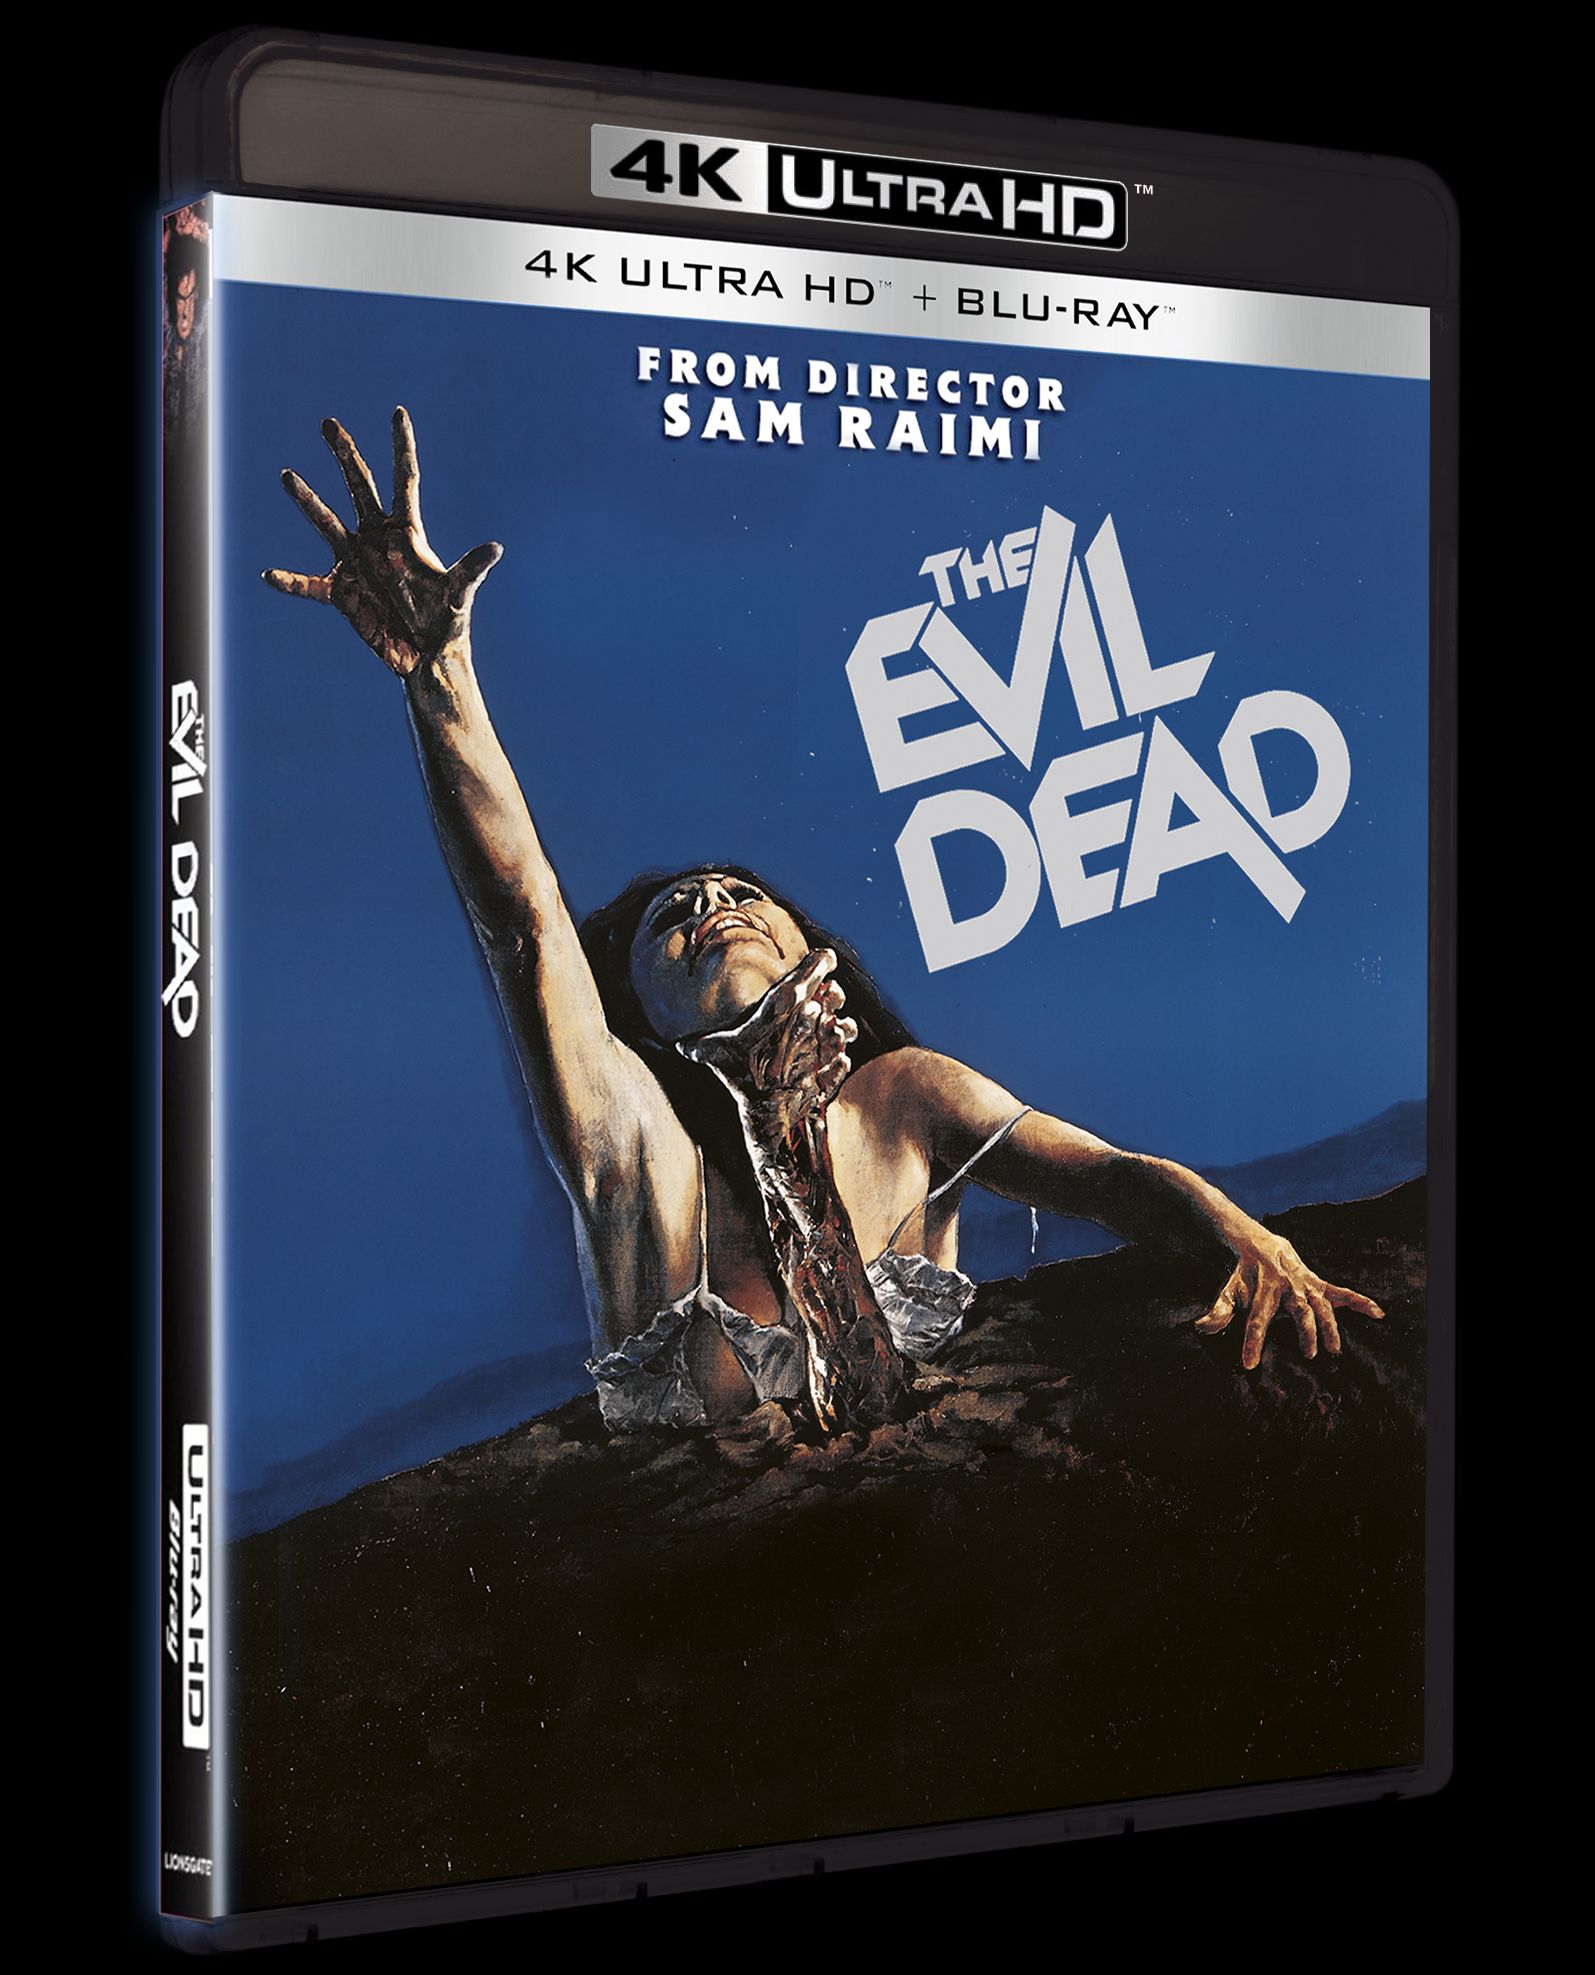 THE EVIL DEAD AVAILABLE FOR THE FIRST TIME ON 4K ULTRA HD ON NOVEMBER 16